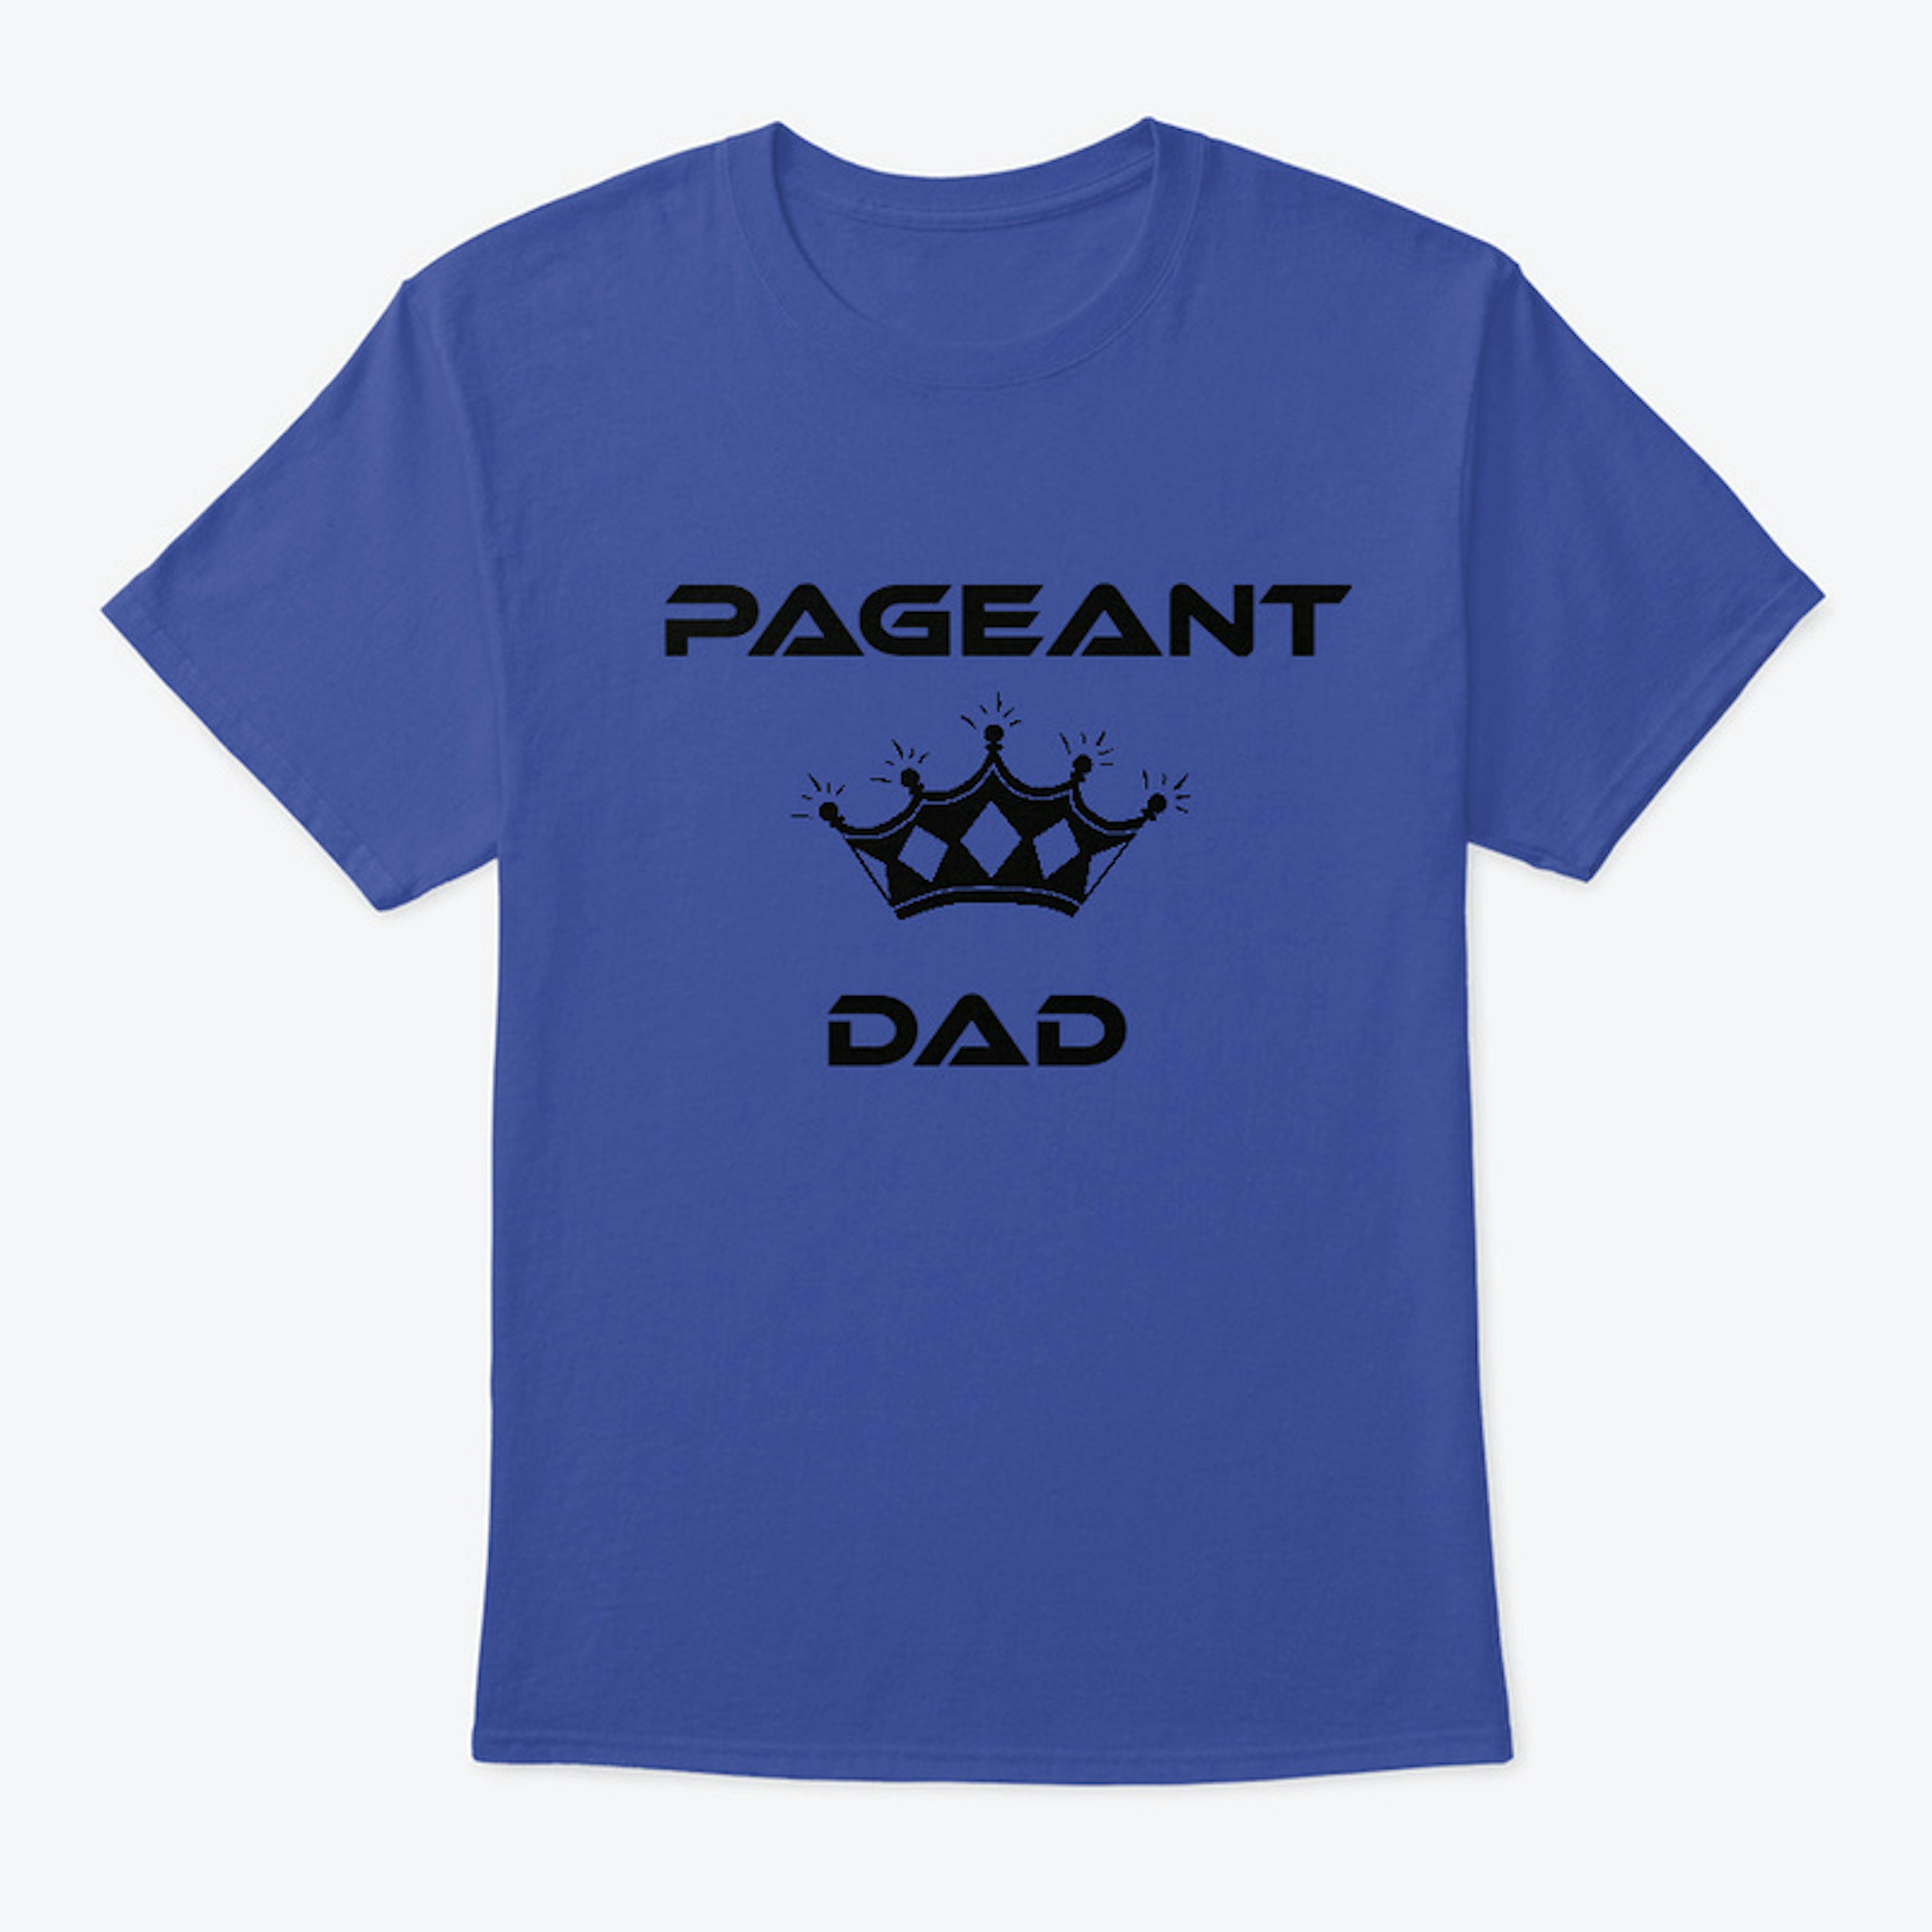 Pageant Dad tee 